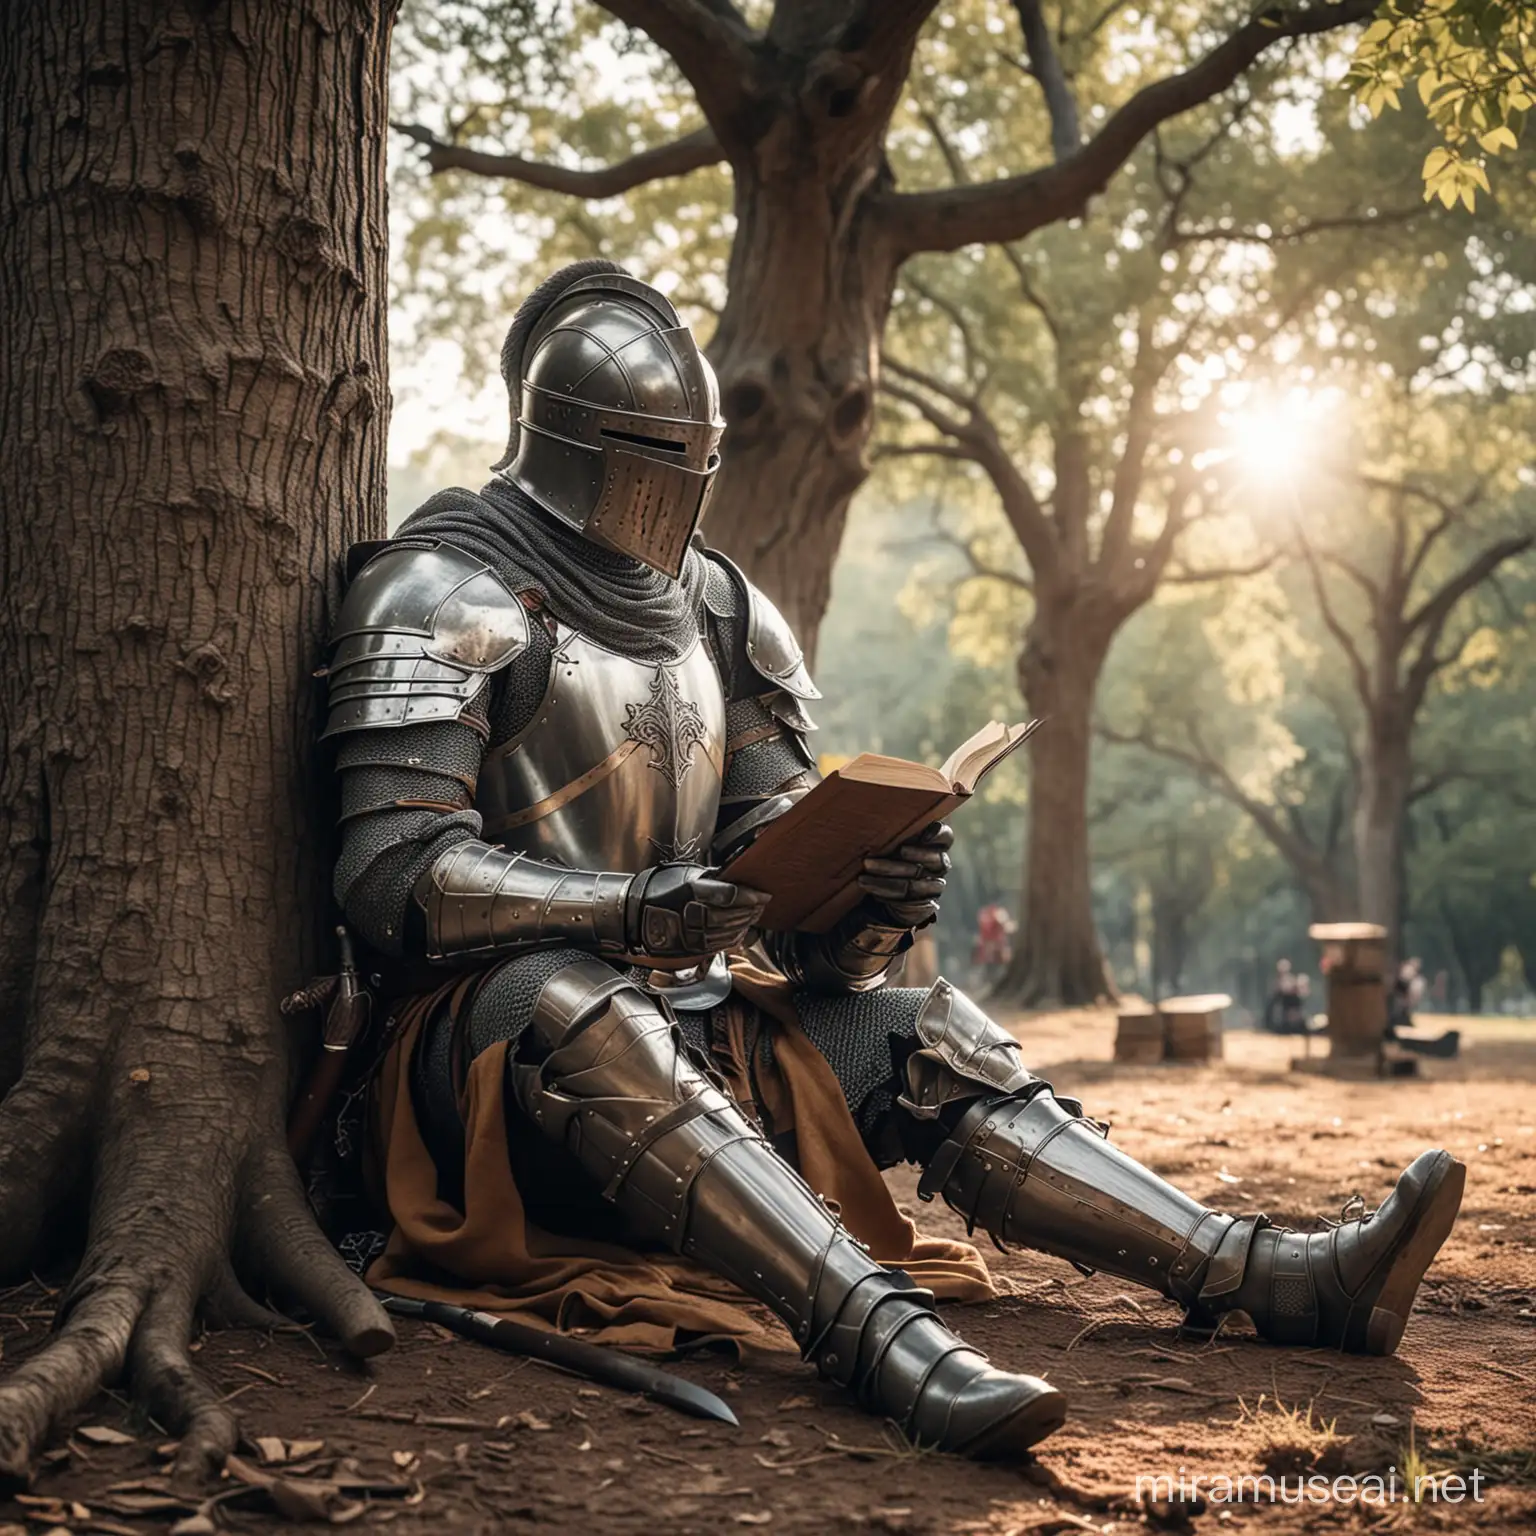 a knight sitting resting against a tree, reading a book. his sword is on the ground next to him.